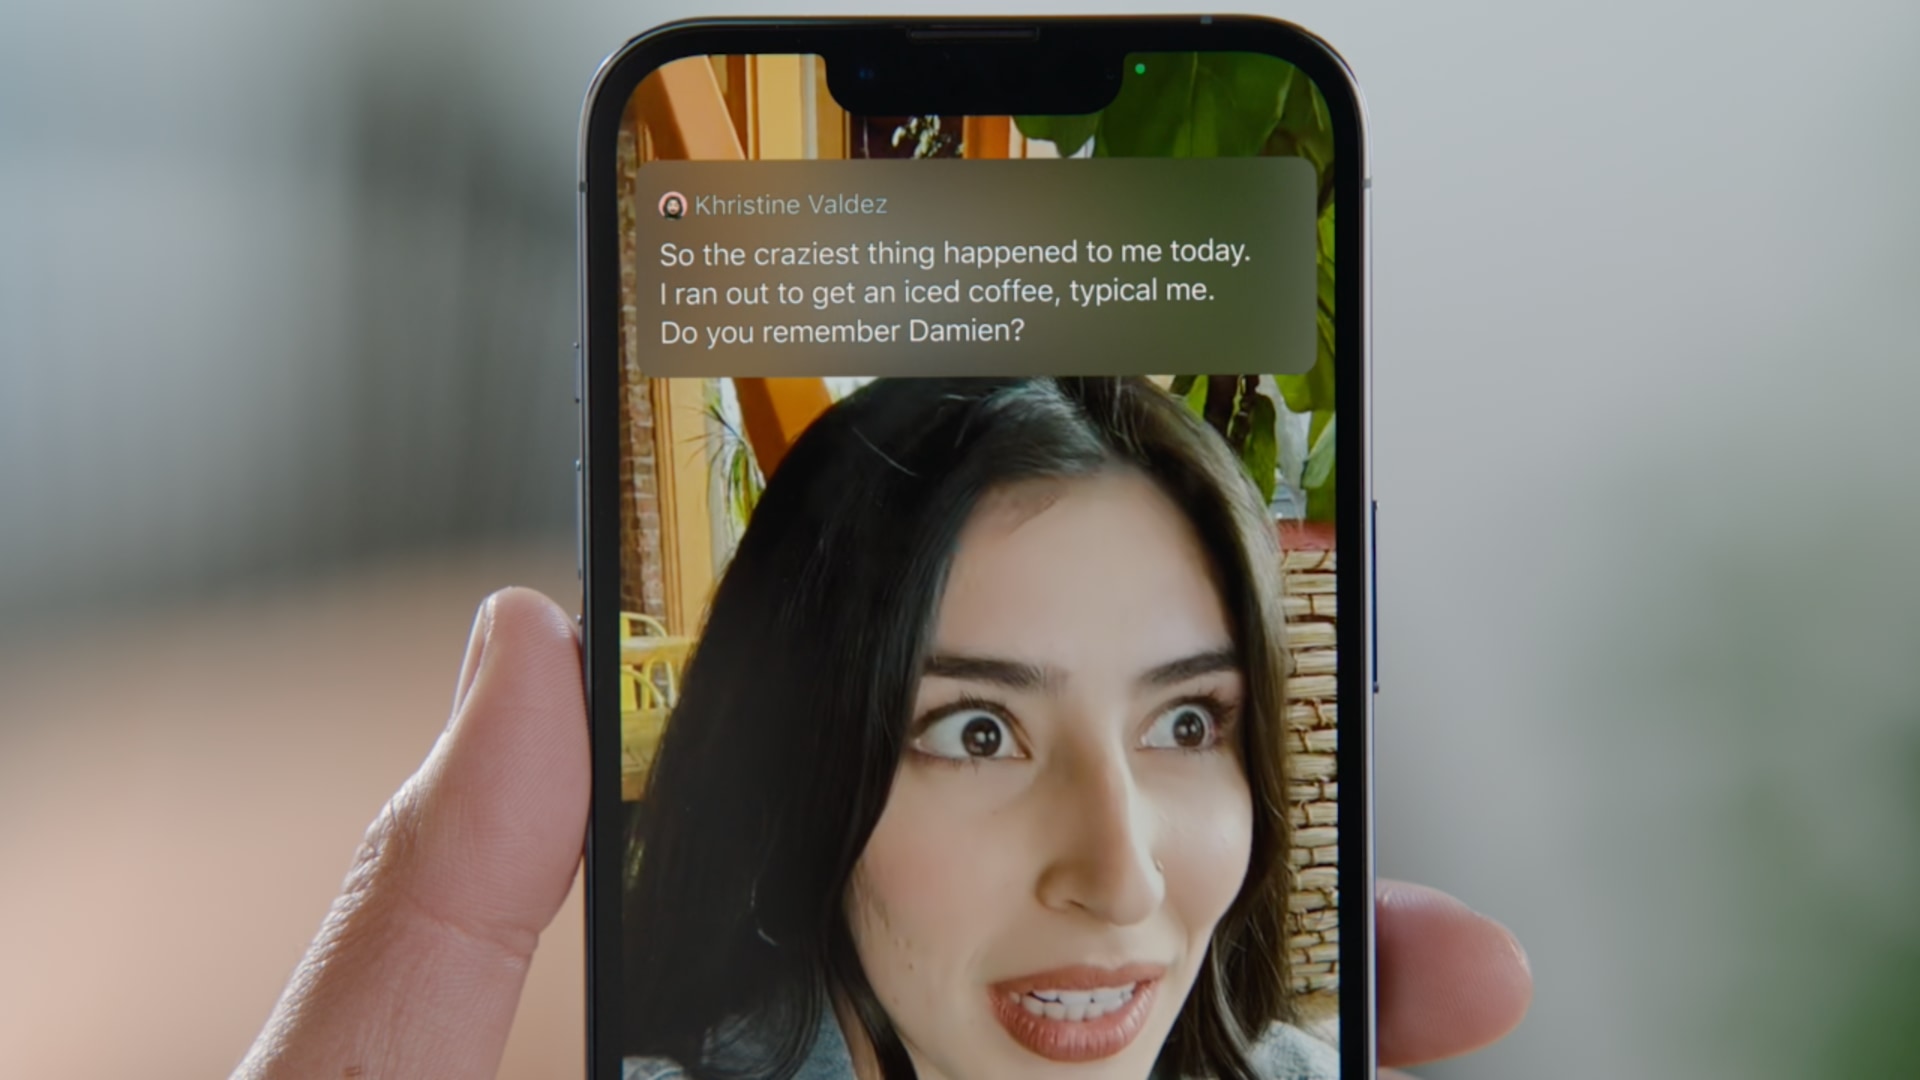 A photograph showing an iPhone held in a person's hand, demonstrating the Live Captions feature in action during a FaceTime video call 